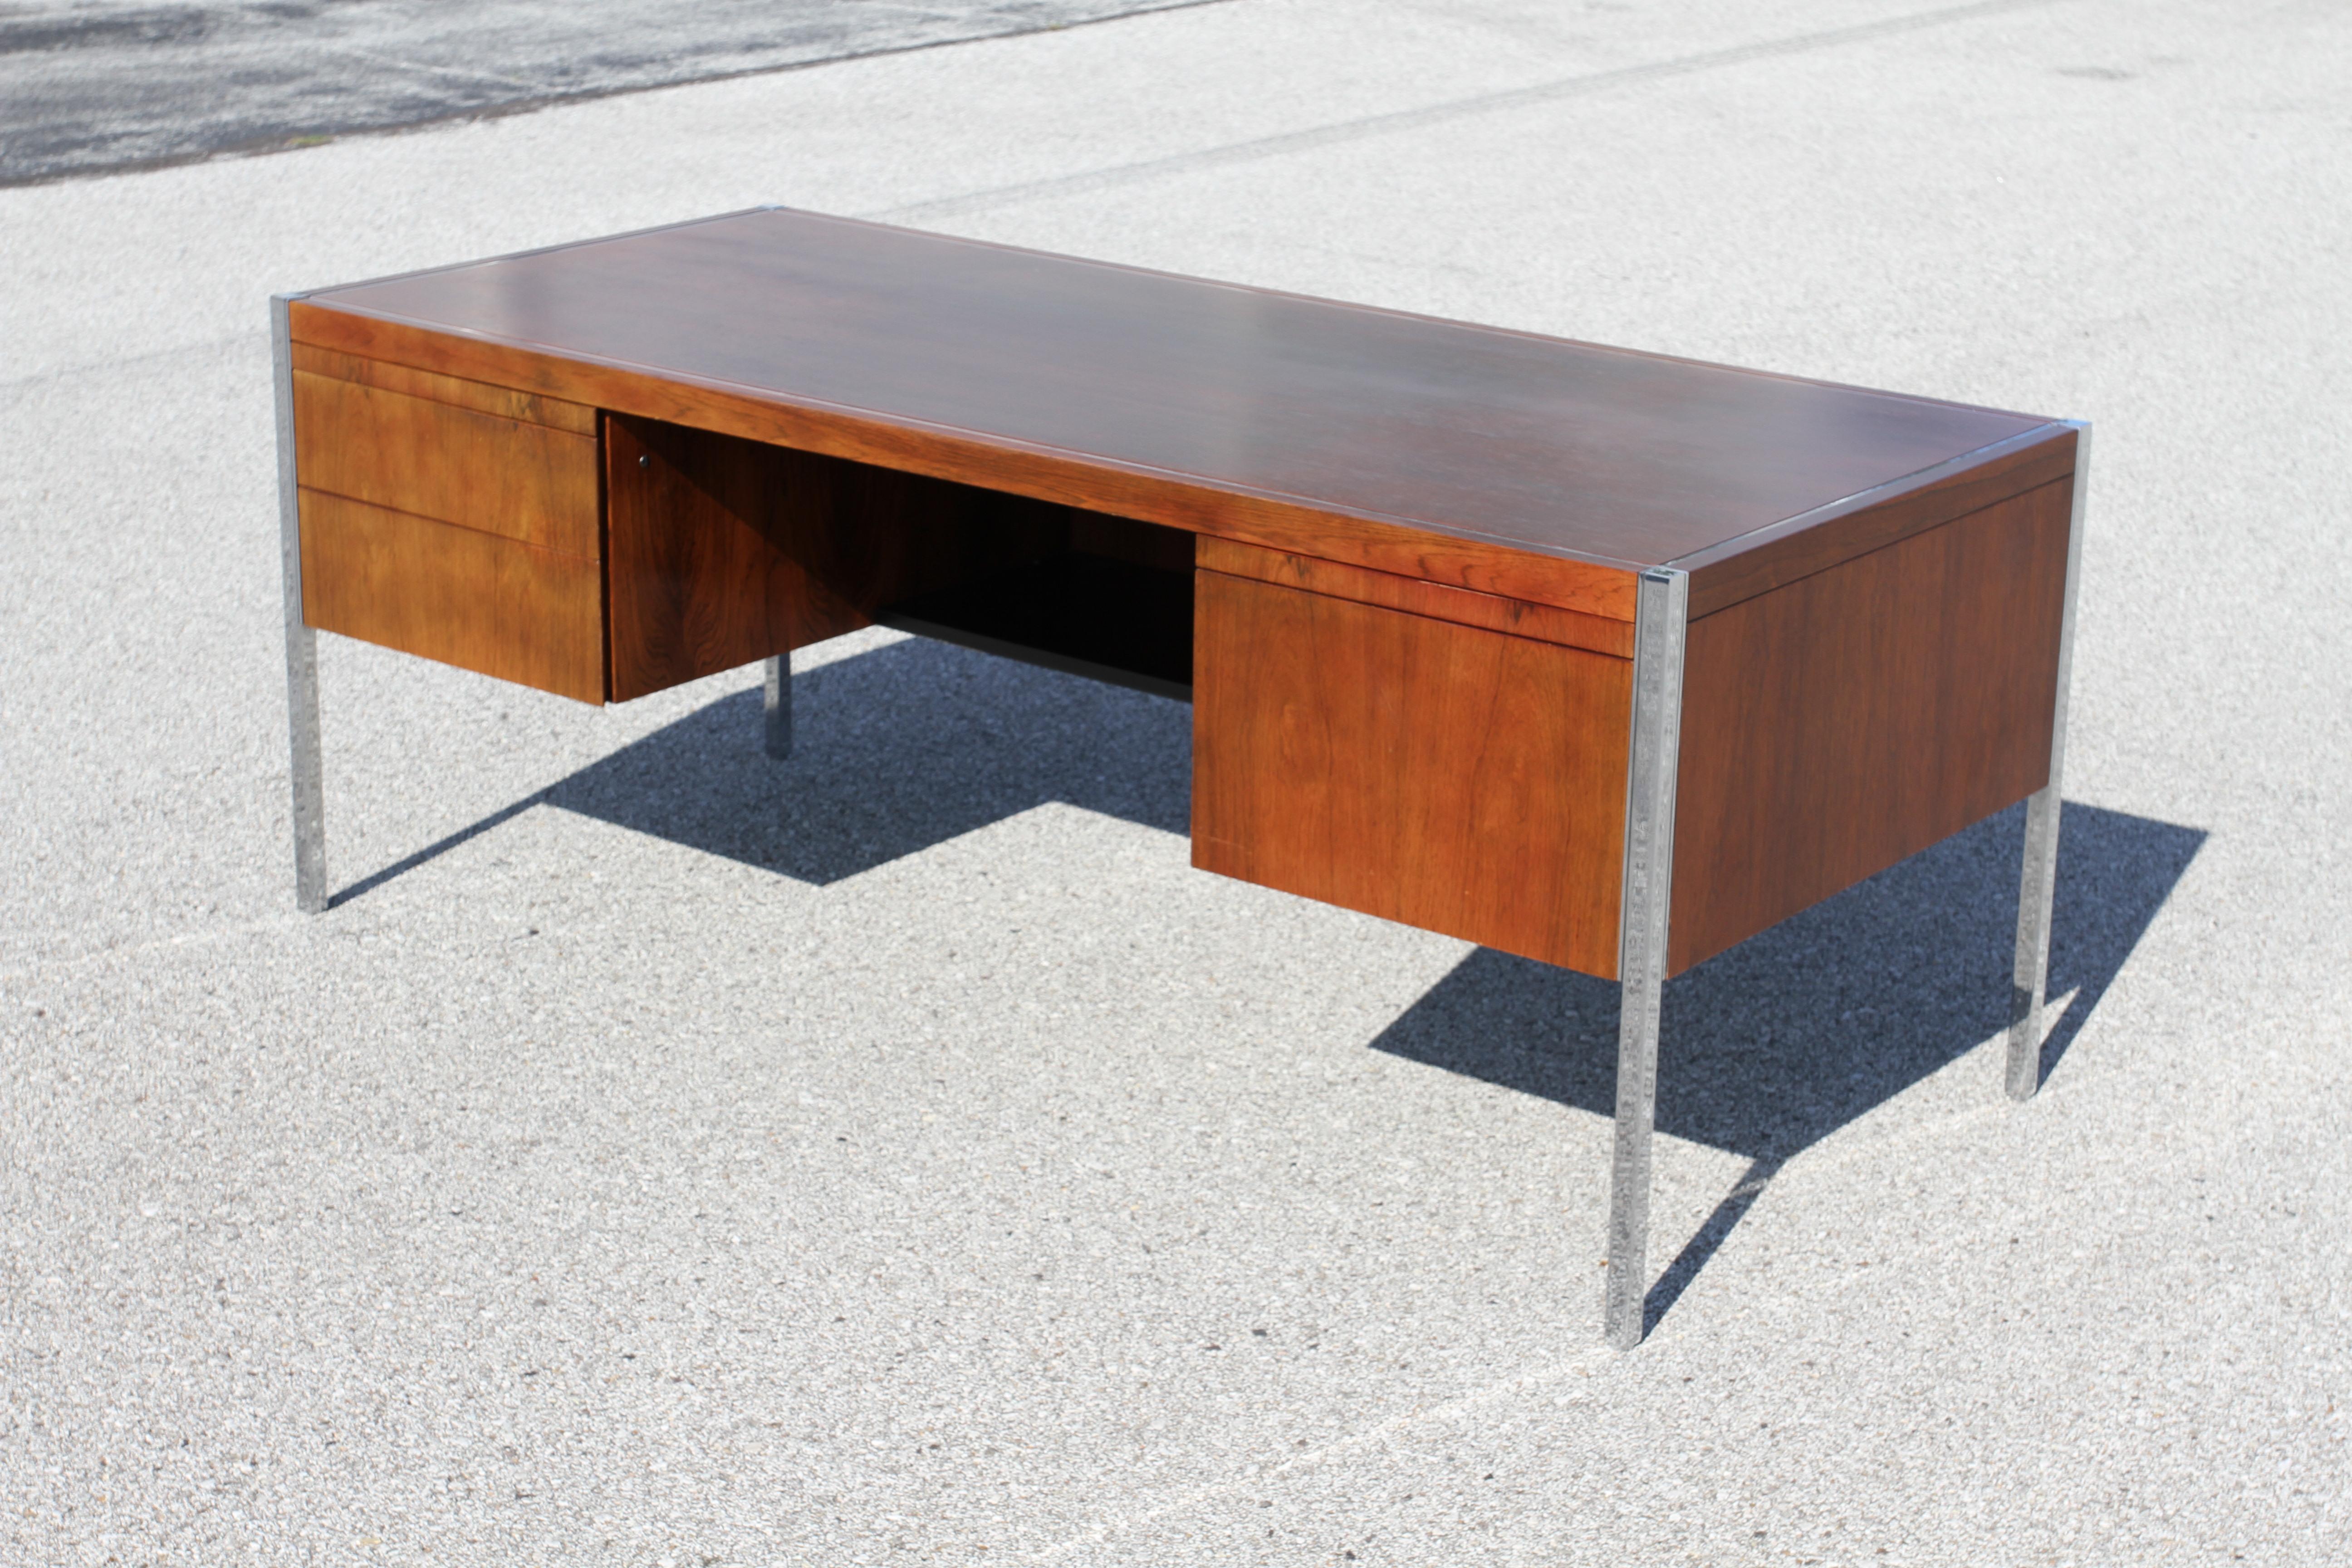 American Richard Schultz for Knoll 1960s Mid-Century Modern Rosewood Executive Desk #4146 For Sale